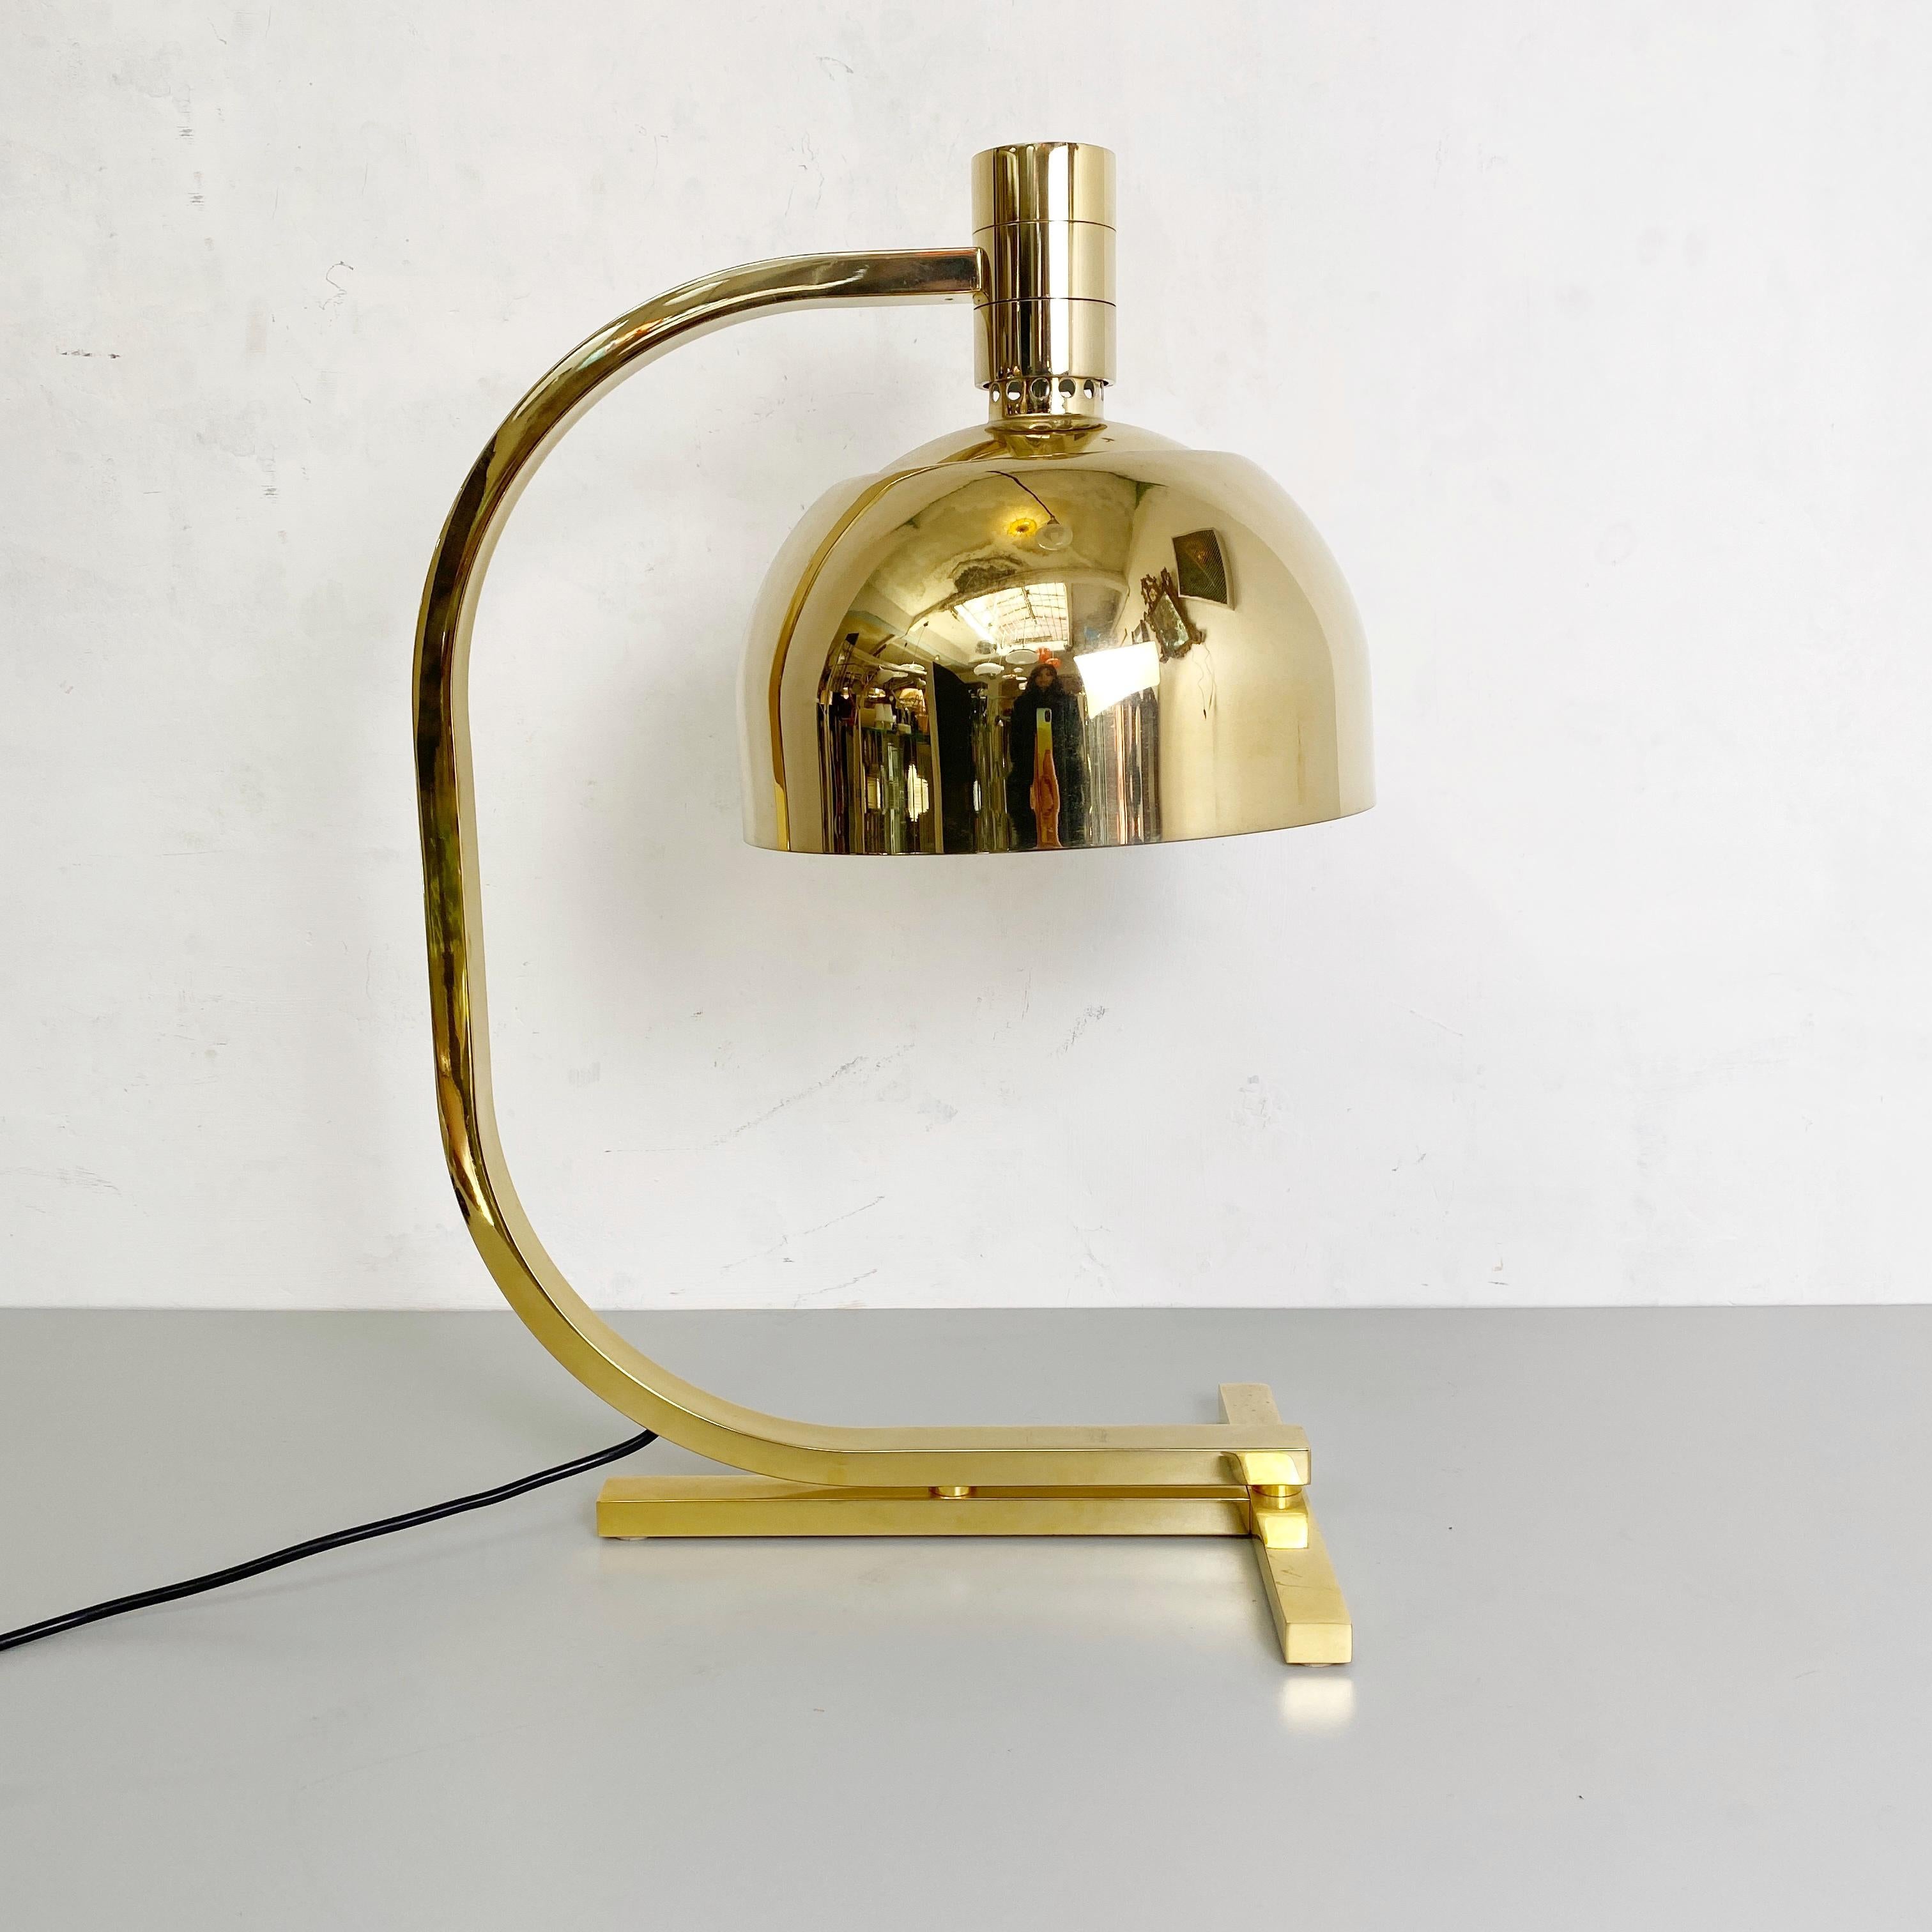 AM \ AS Gold Chrome Table Lamp by Franco Albini and Franca Helg for Sirrah, 1969 For Sale 4